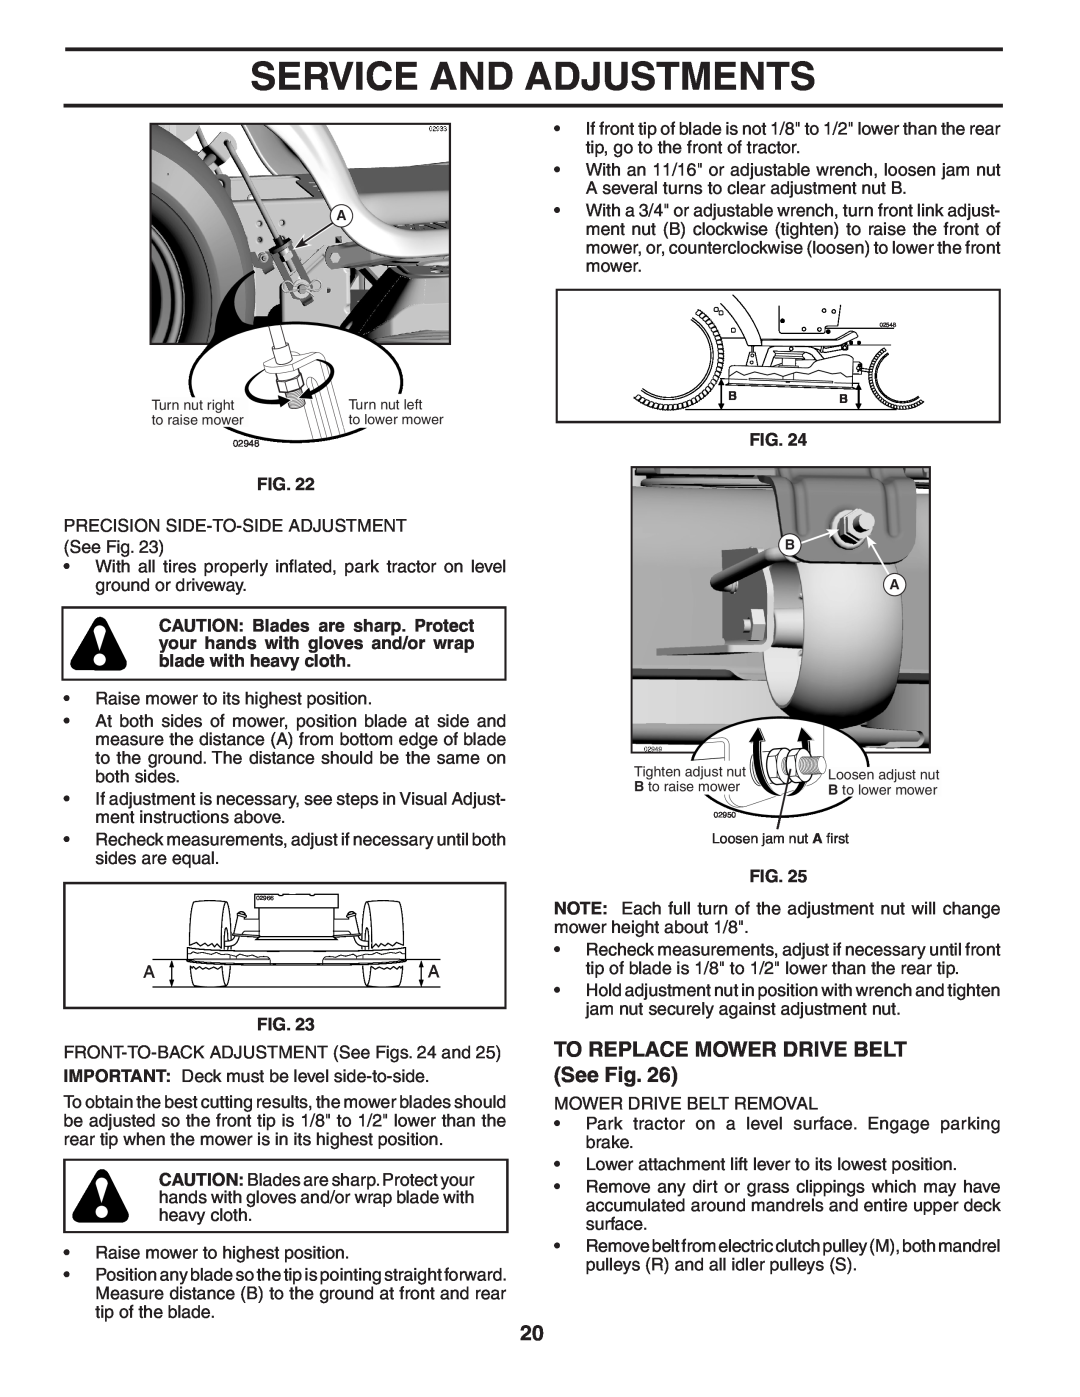 Poulan 404655, 96042000801 manual TO REPLACE MOWER DRIVE BELT See Fig, Service And Adjustments 